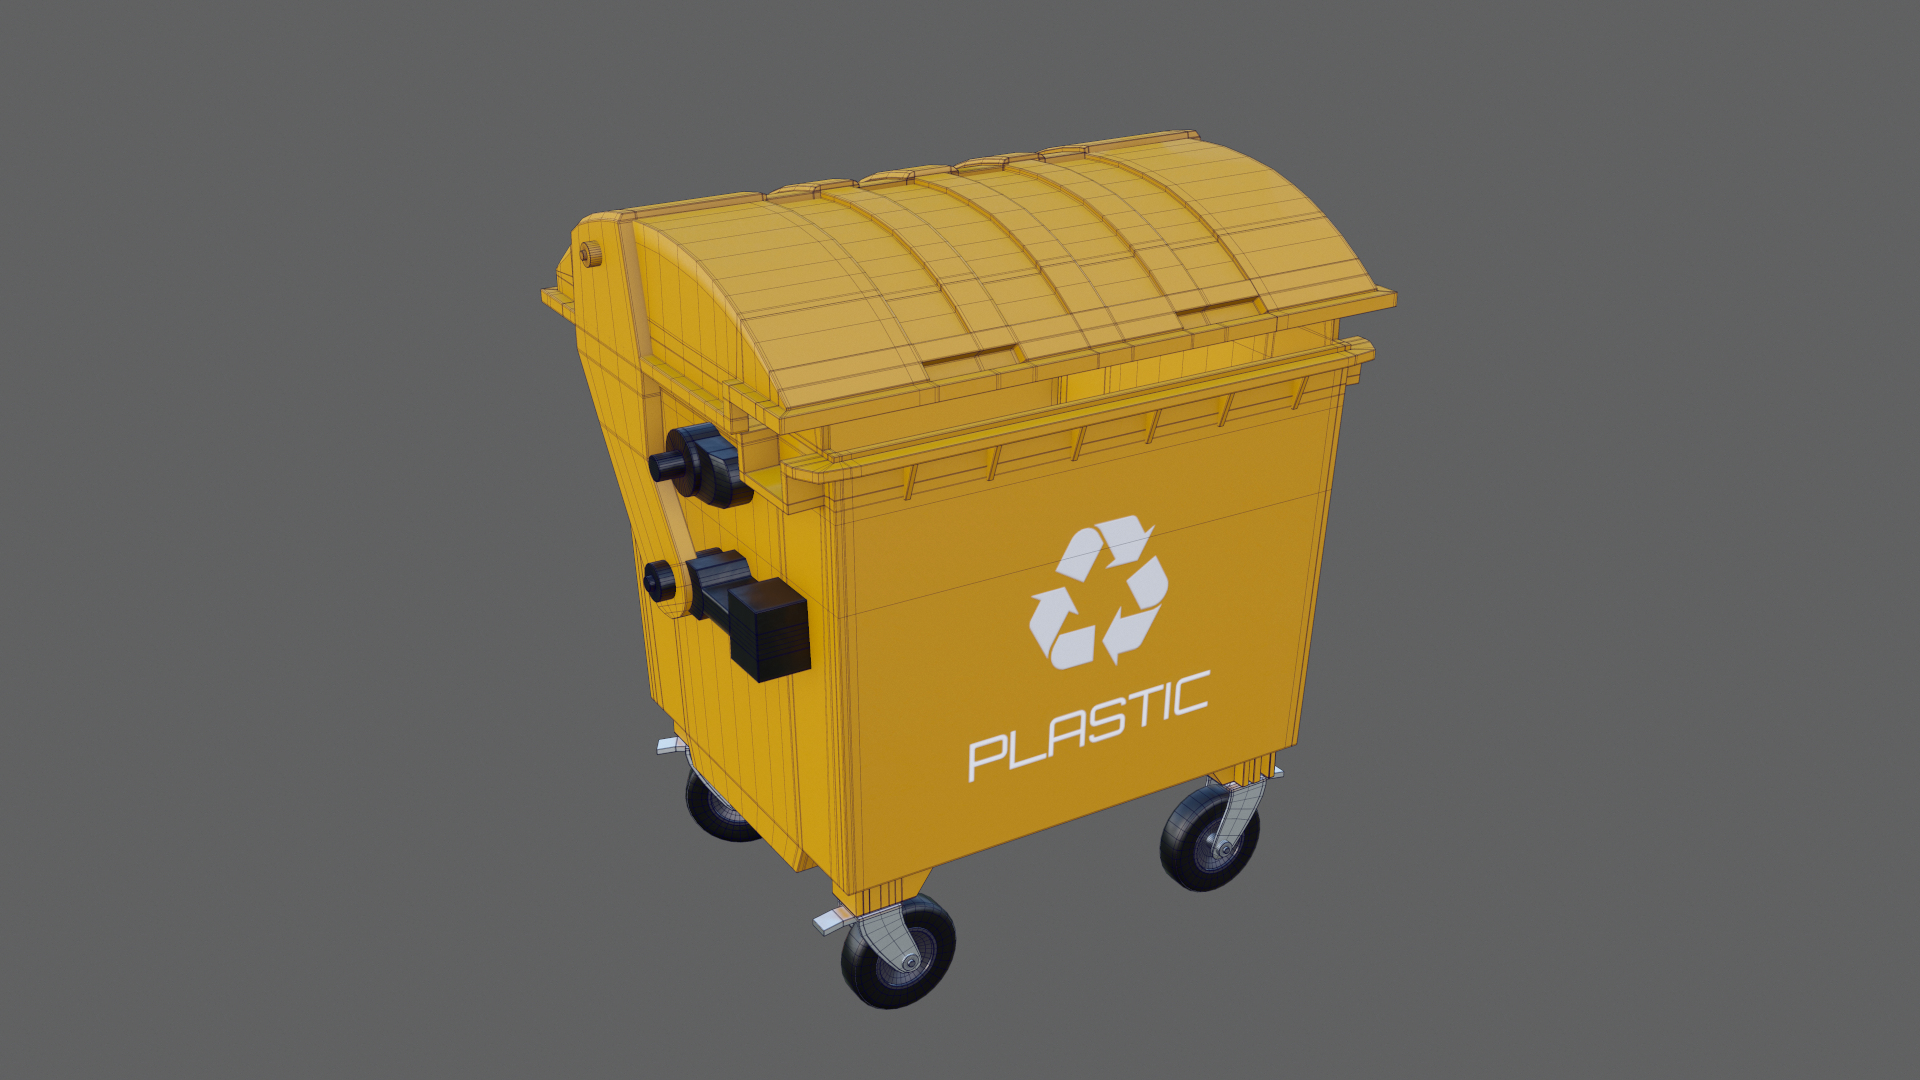 3D Plastic Garbage Container 500 l model https://p.turbosquid.com/ts-thumb/AO/Dhjxbg/to/turntable/png/1671973275/1920x1080/turn_fit_q99/846f407dd3469b4605a663376a39d84215366992/turntable-1.jpg